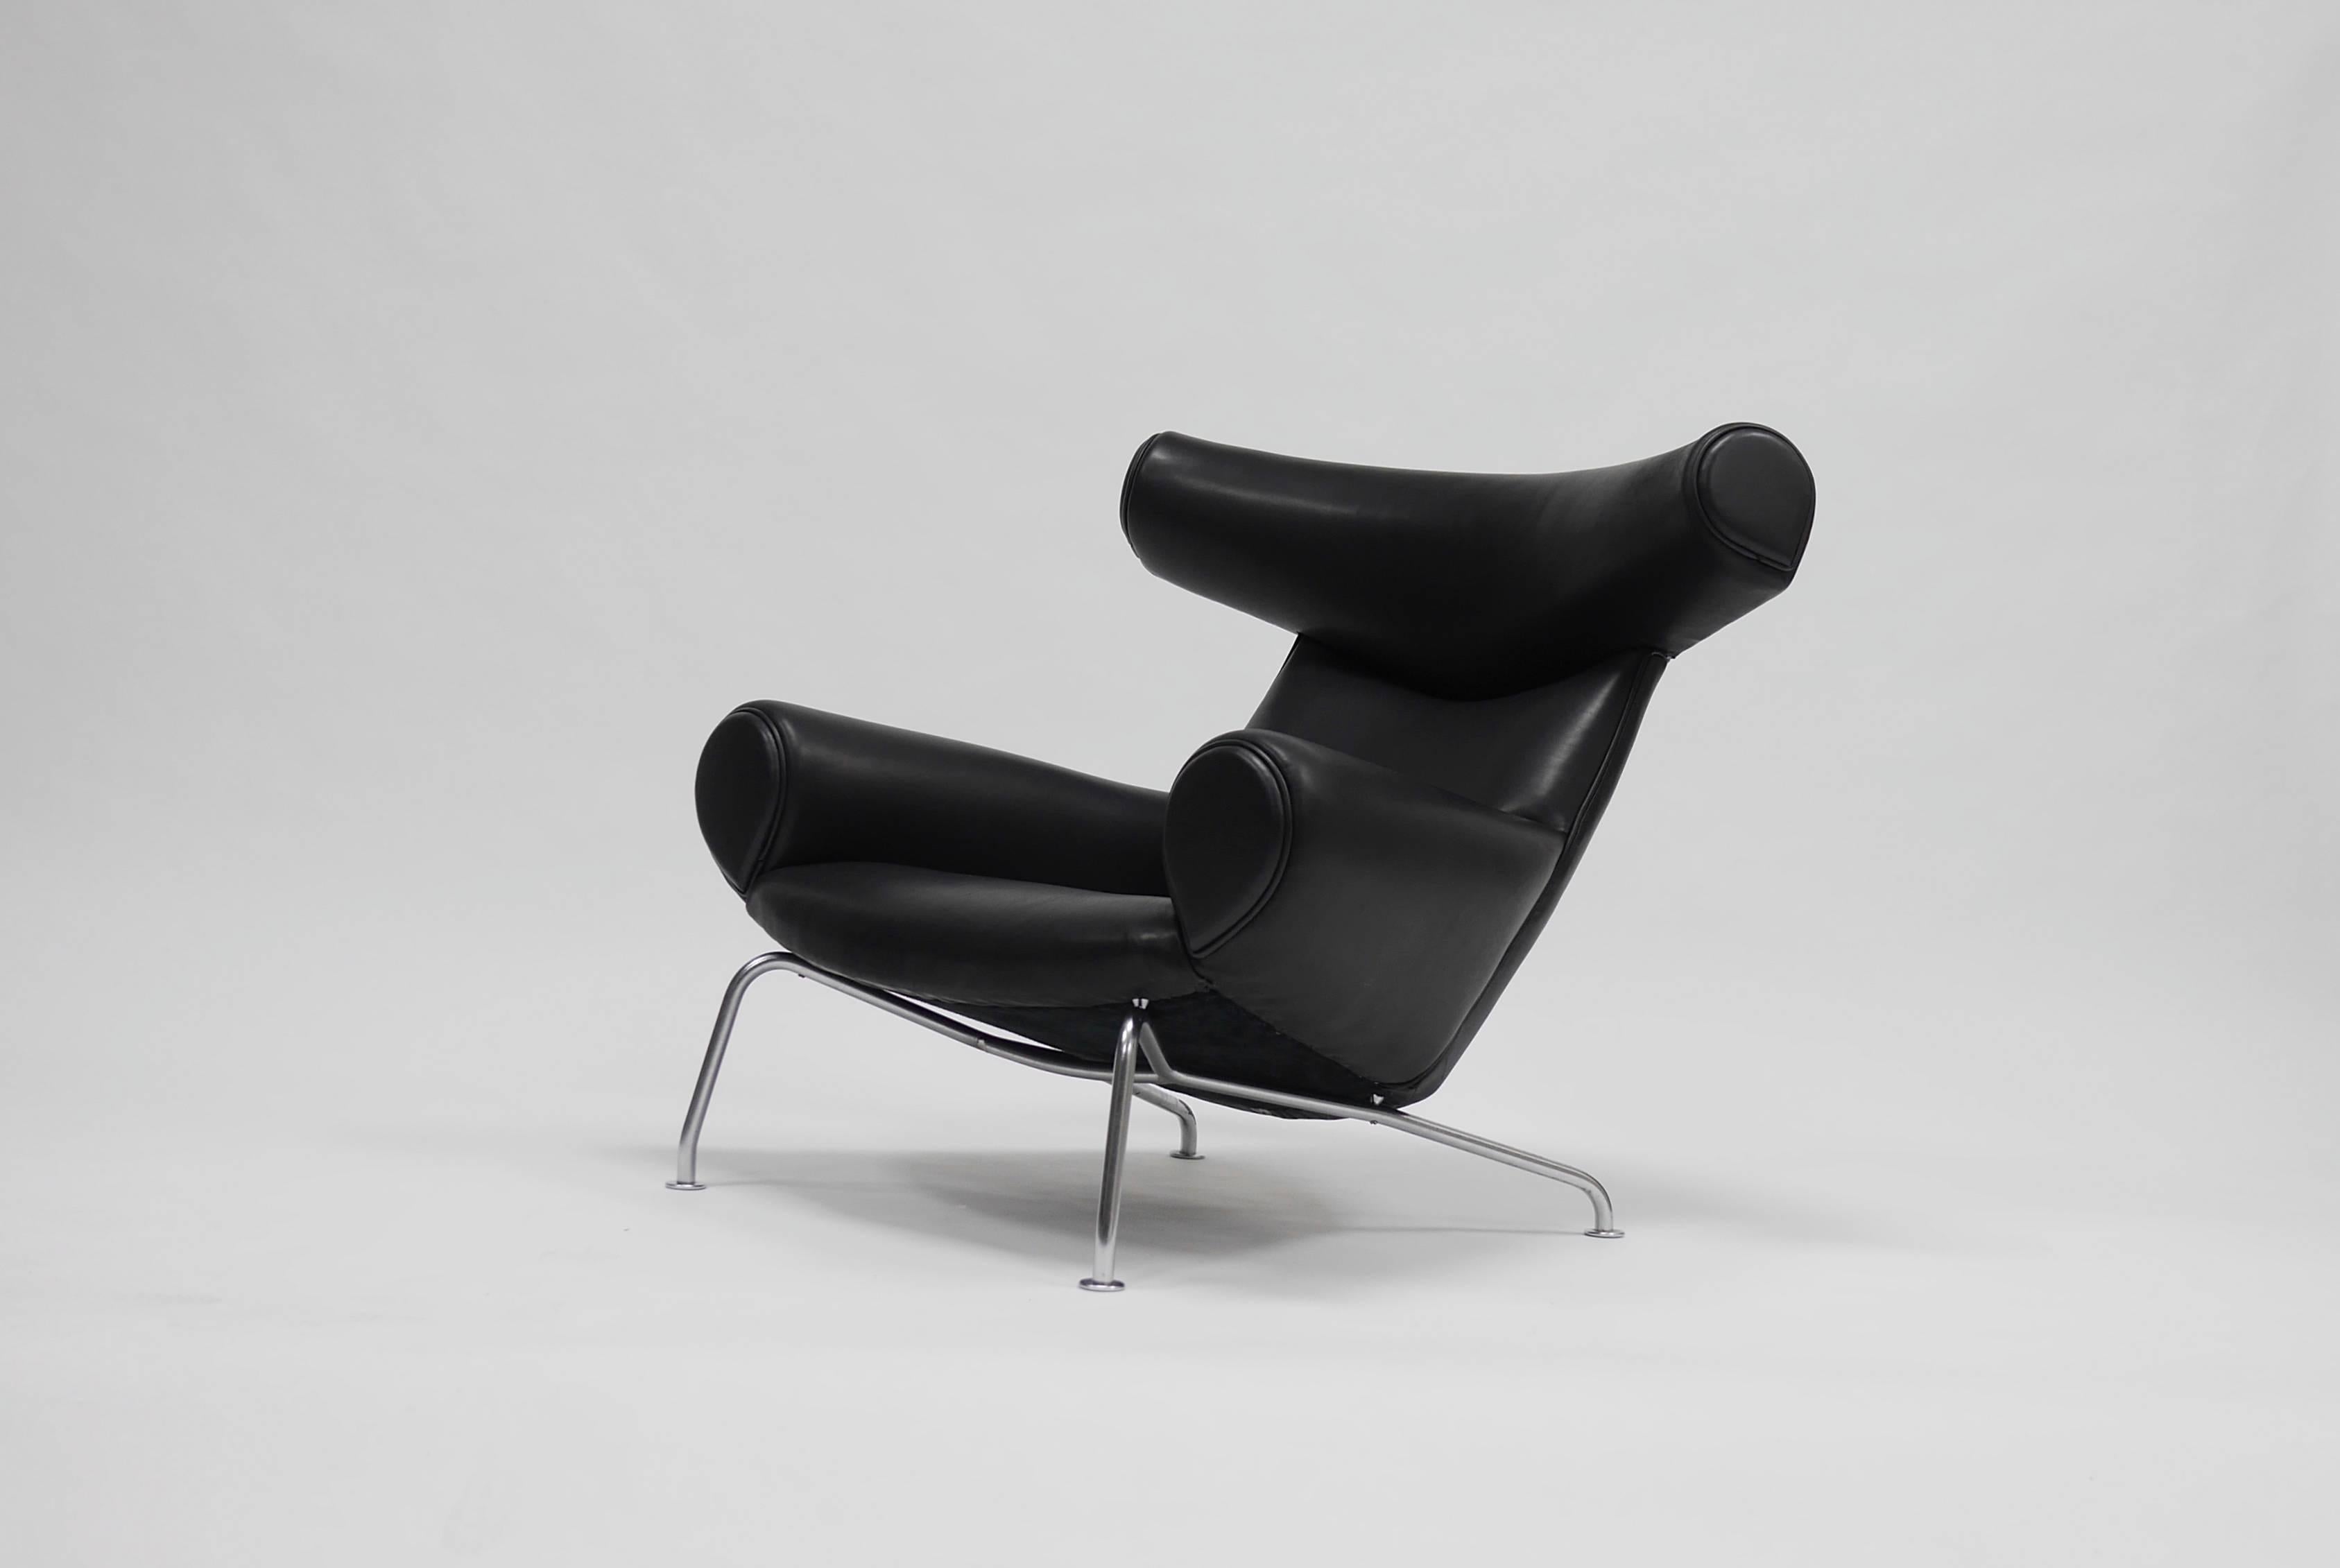 First edition Ox lounge chair by Hans Wegner for A.P. Stolen. This example has been completely refurbished in a lux, waxed, vegetable dyed leather by an upholsterer trained in the Danish tradition.

 